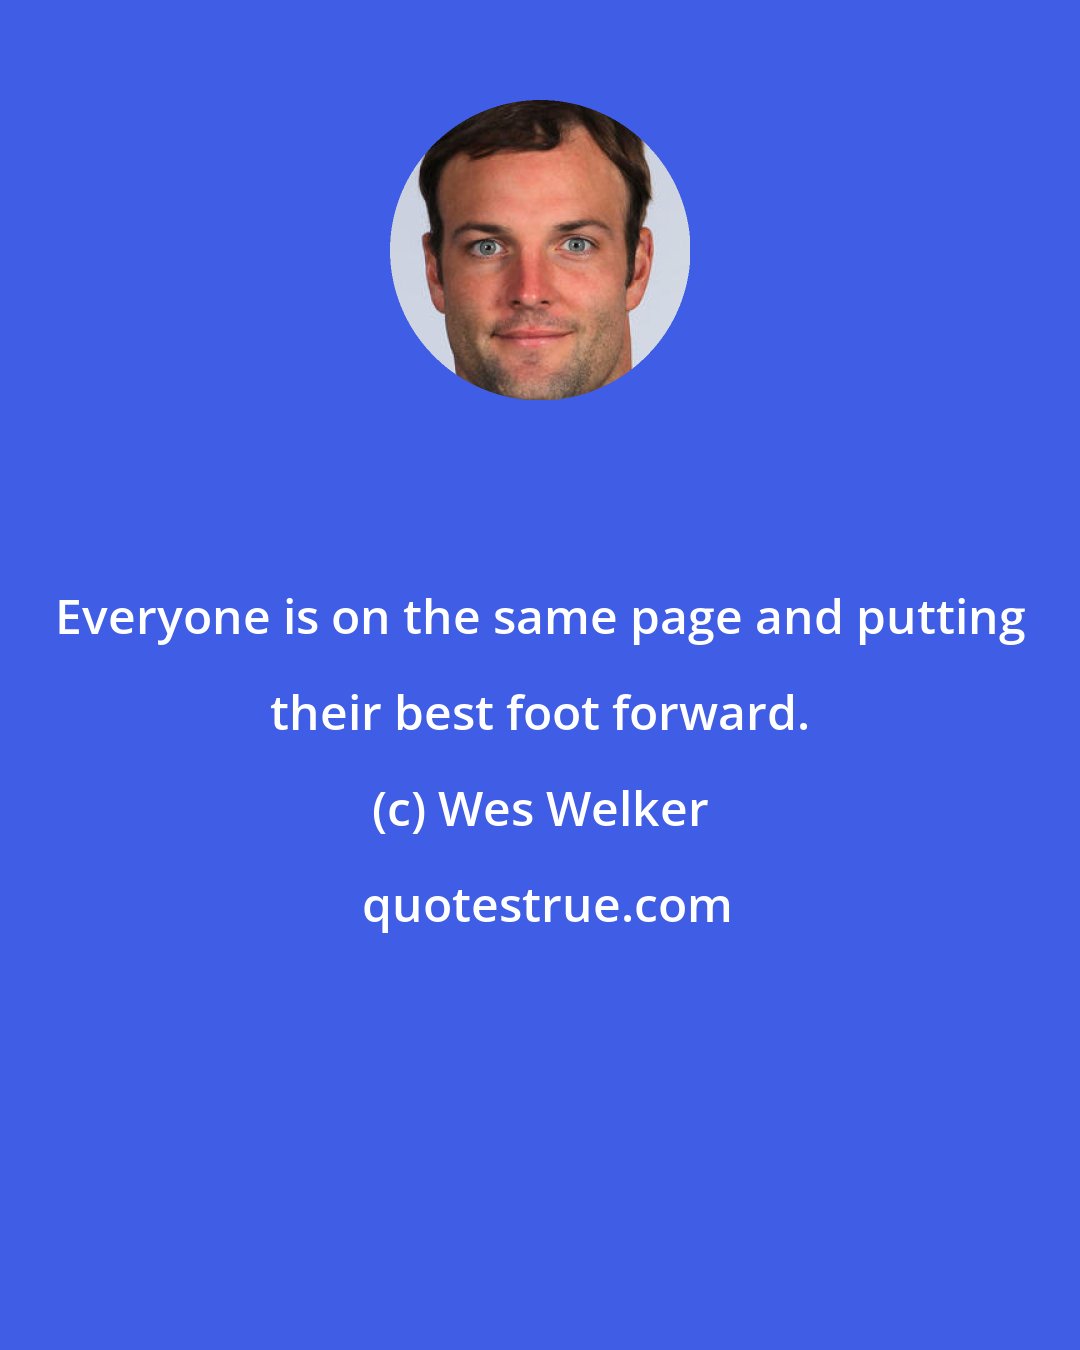 Wes Welker: Everyone is on the same page and putting their best foot forward.